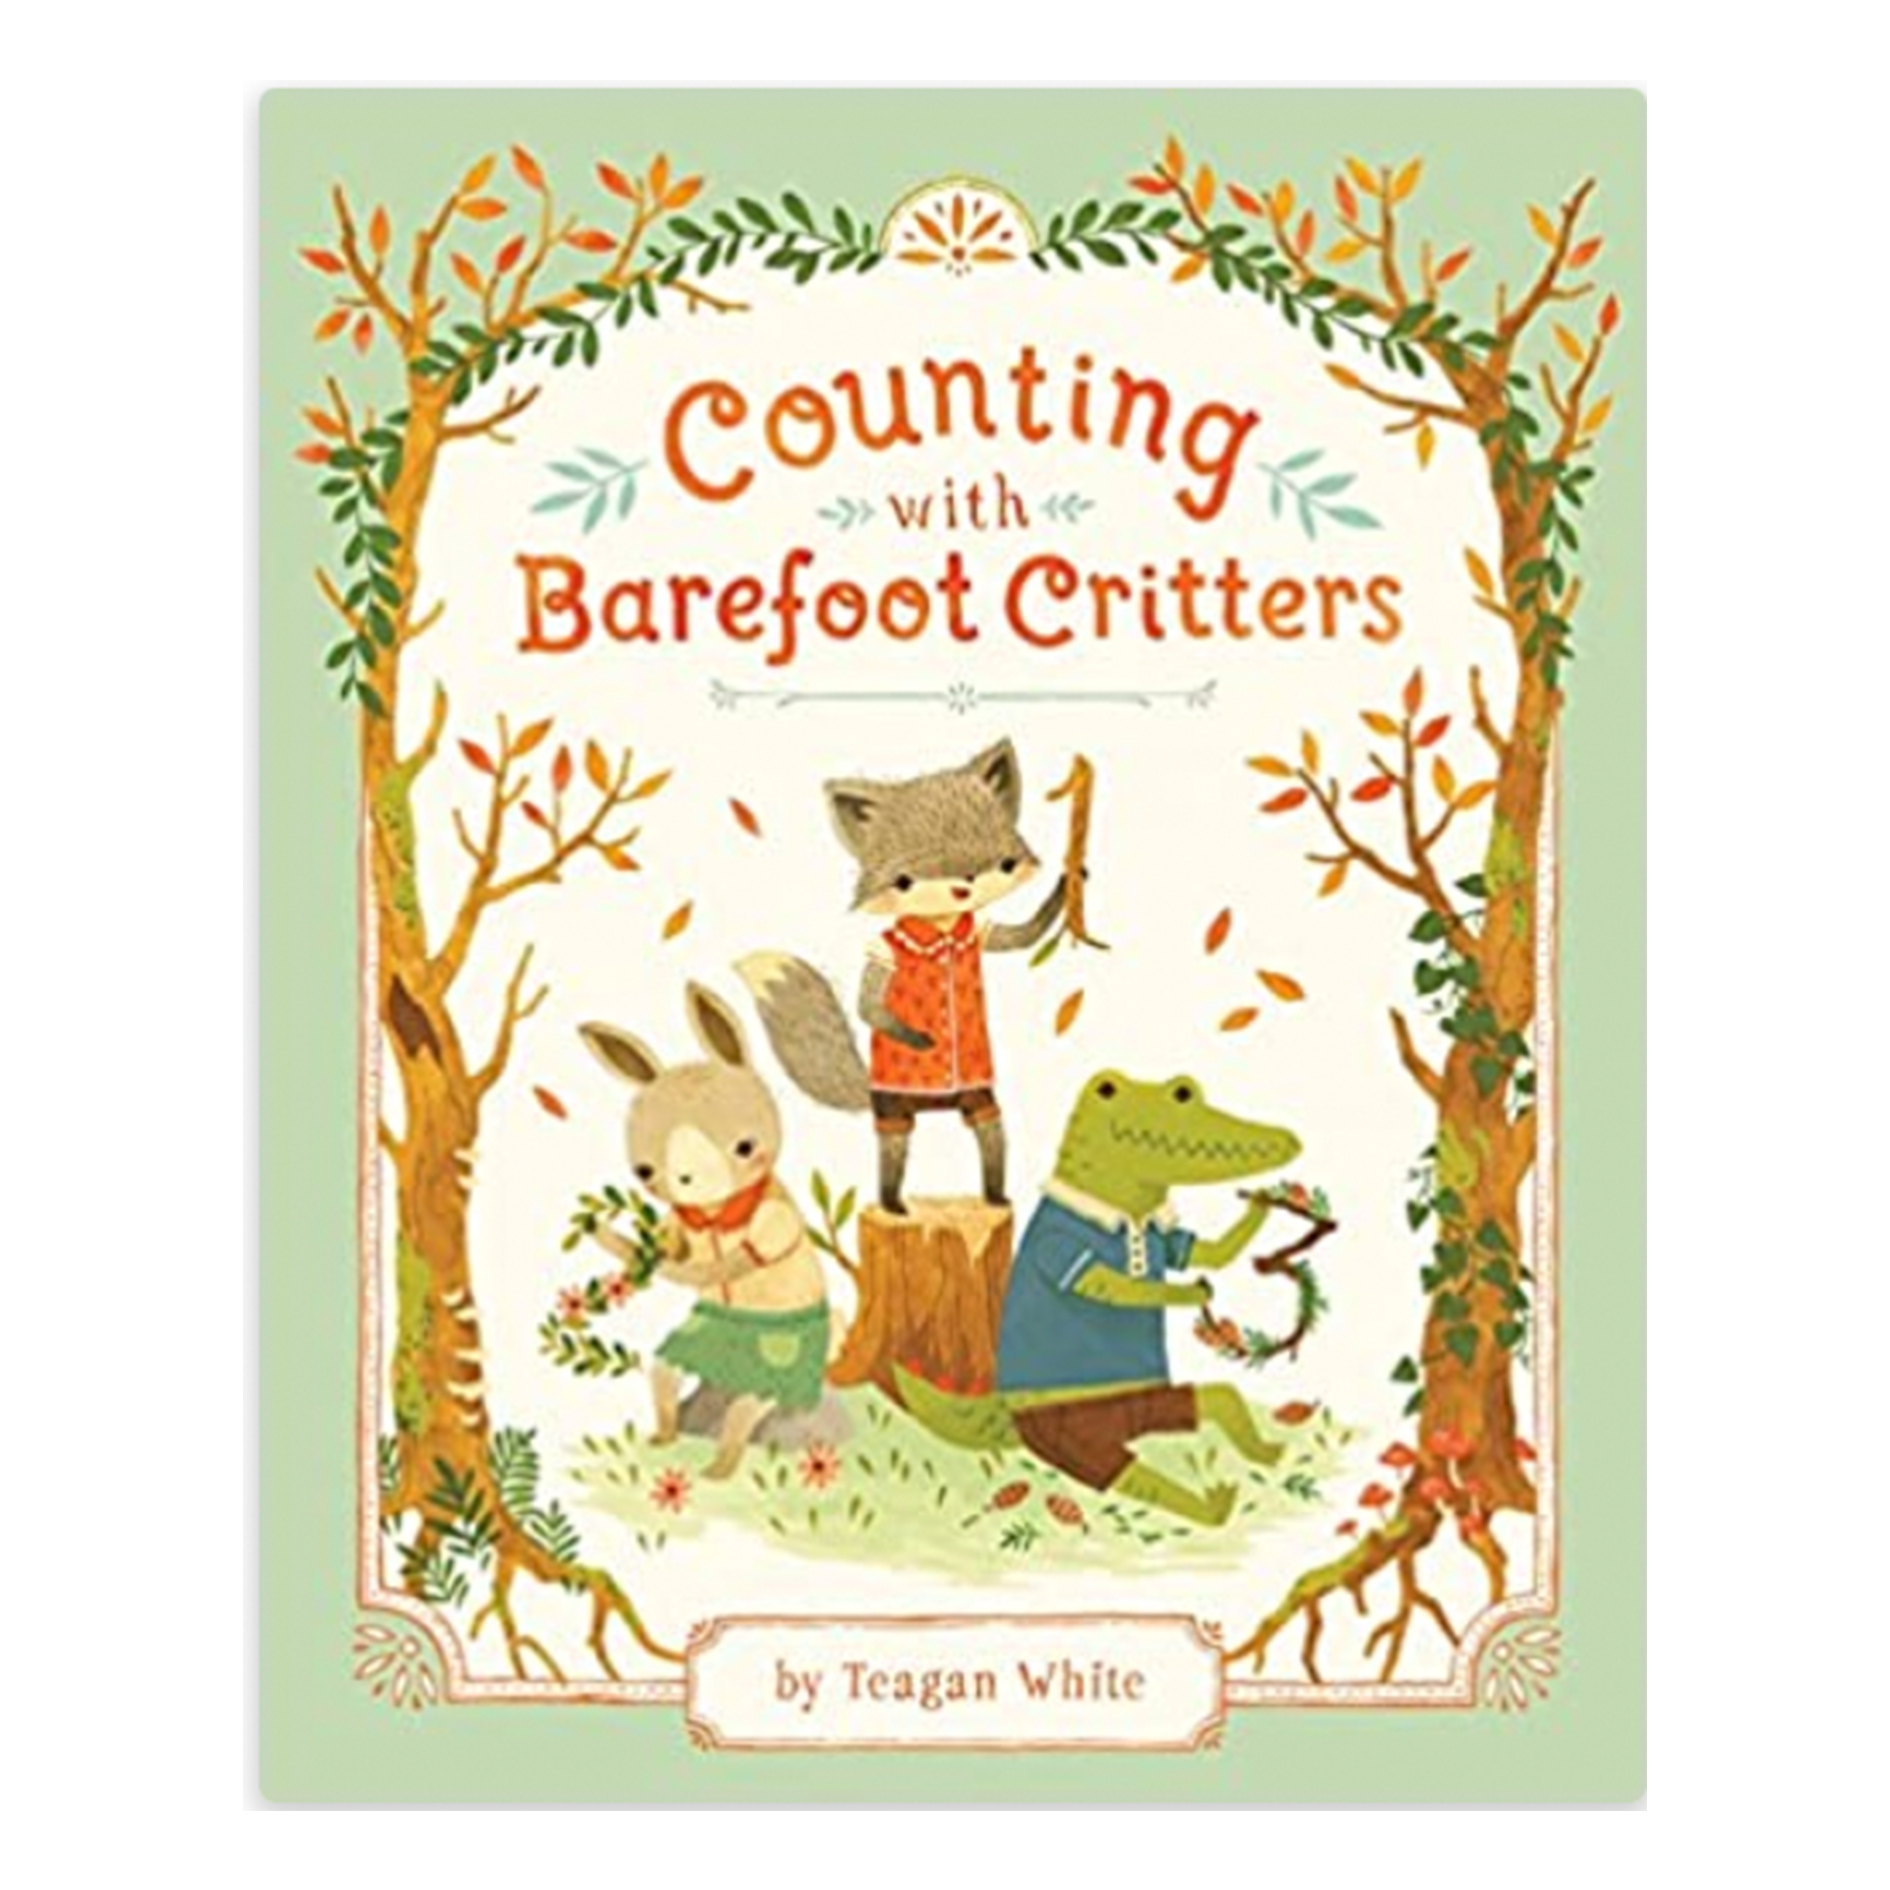 Counting with barefoot critters